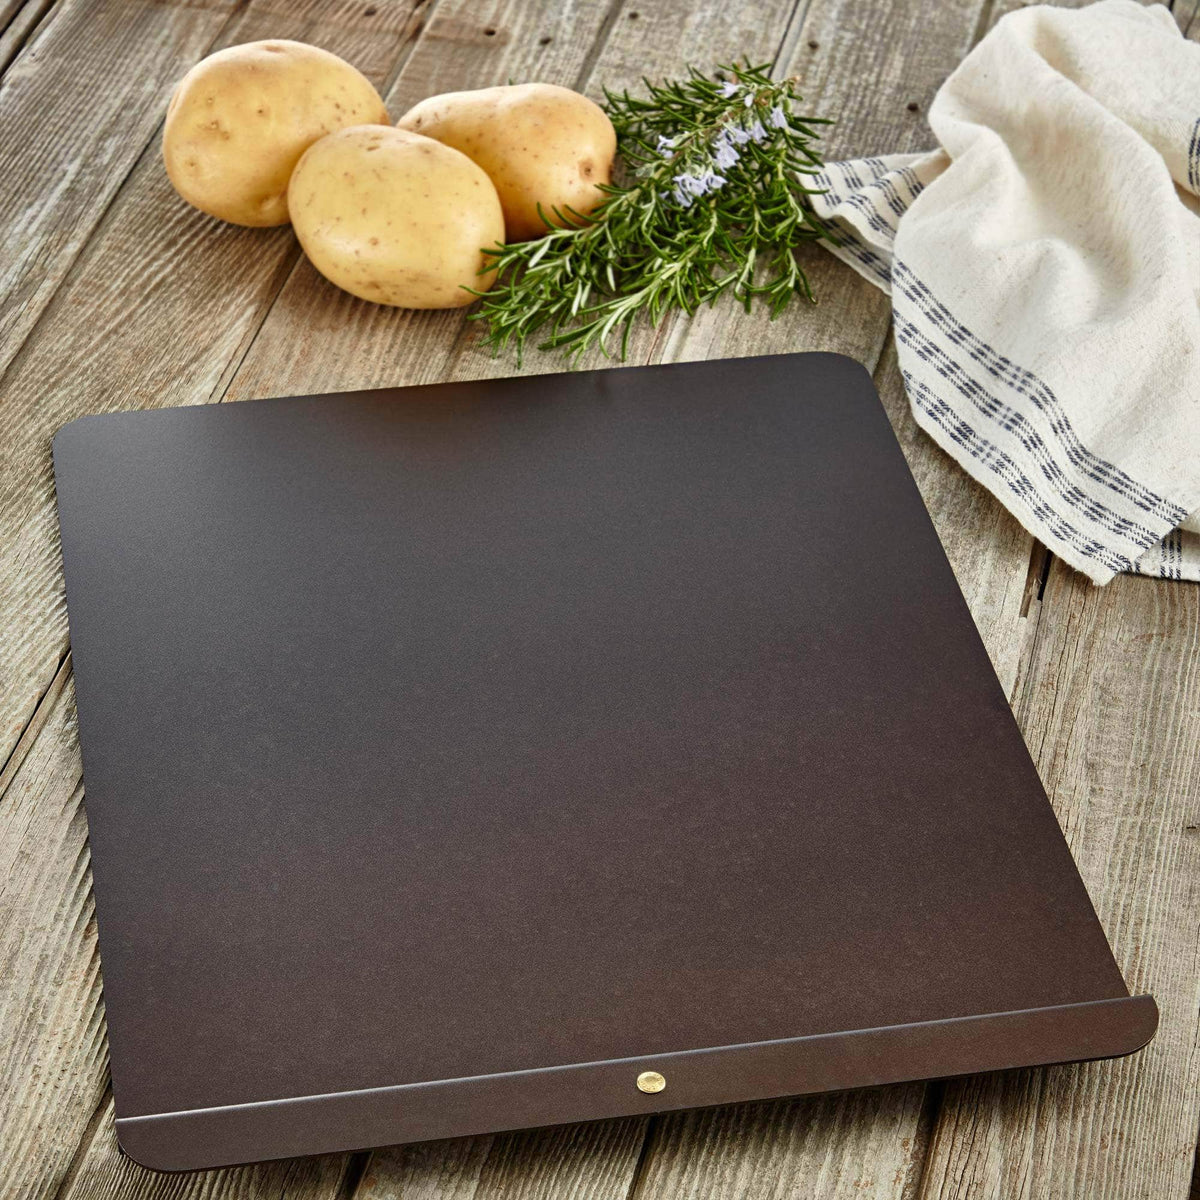 Heavy Duty Baking Tray for use with Aga Range Cookers (full oven size)